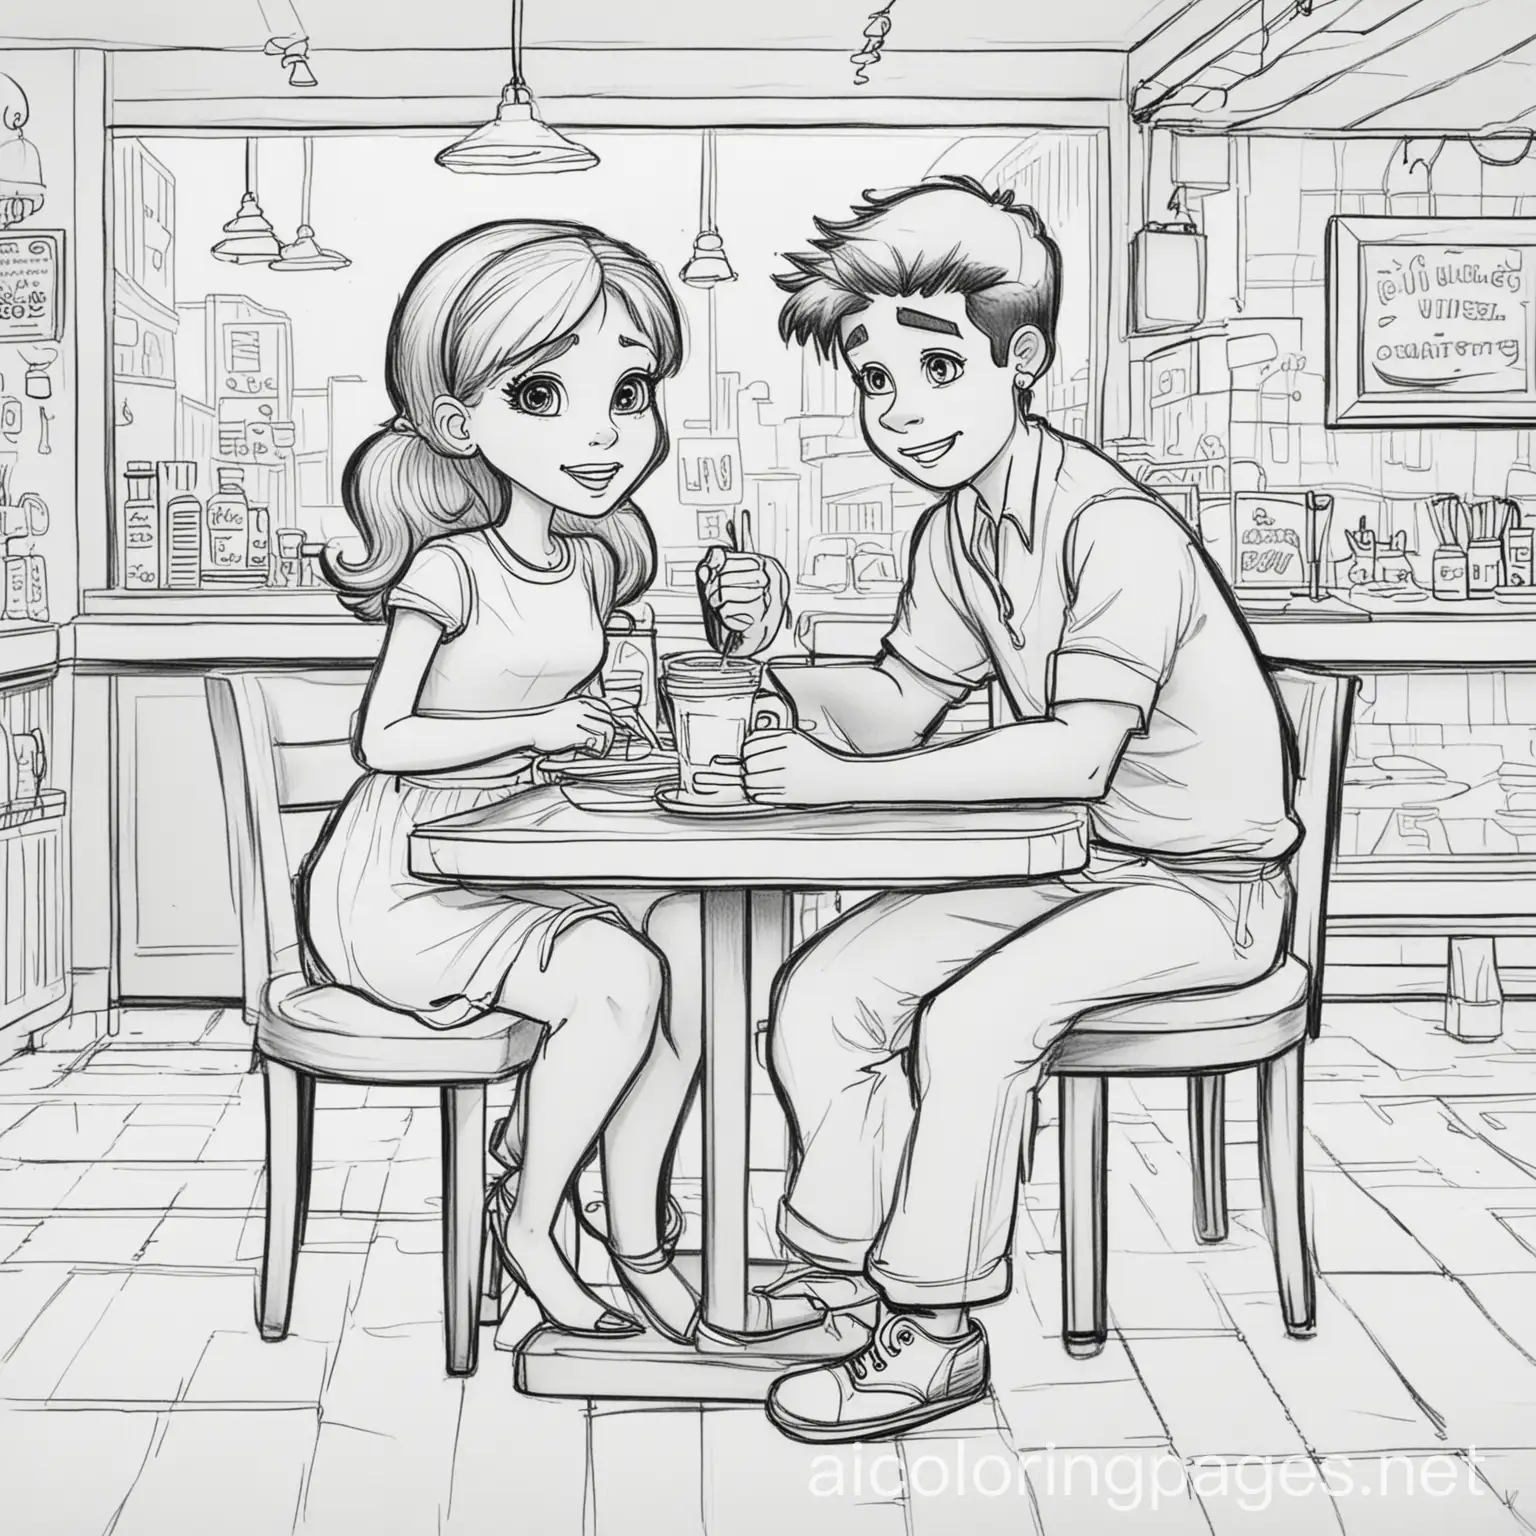 A cartoon boy on a date with a carton Girl at a quirky diner in a ghetto, featuring eccentric waitstaff 
 Adult Coloring Page, black and white, line art, white background, Simplicity, Ample White Space
, Coloring Page, black and white, line art, white background, Simplicity, Ample White Space. The background of the coloring page is plain white to make it easy for young children to color within the lines. The outlines of all the subjects are easy to distinguish, making it simple for kids to color without too much difficulty